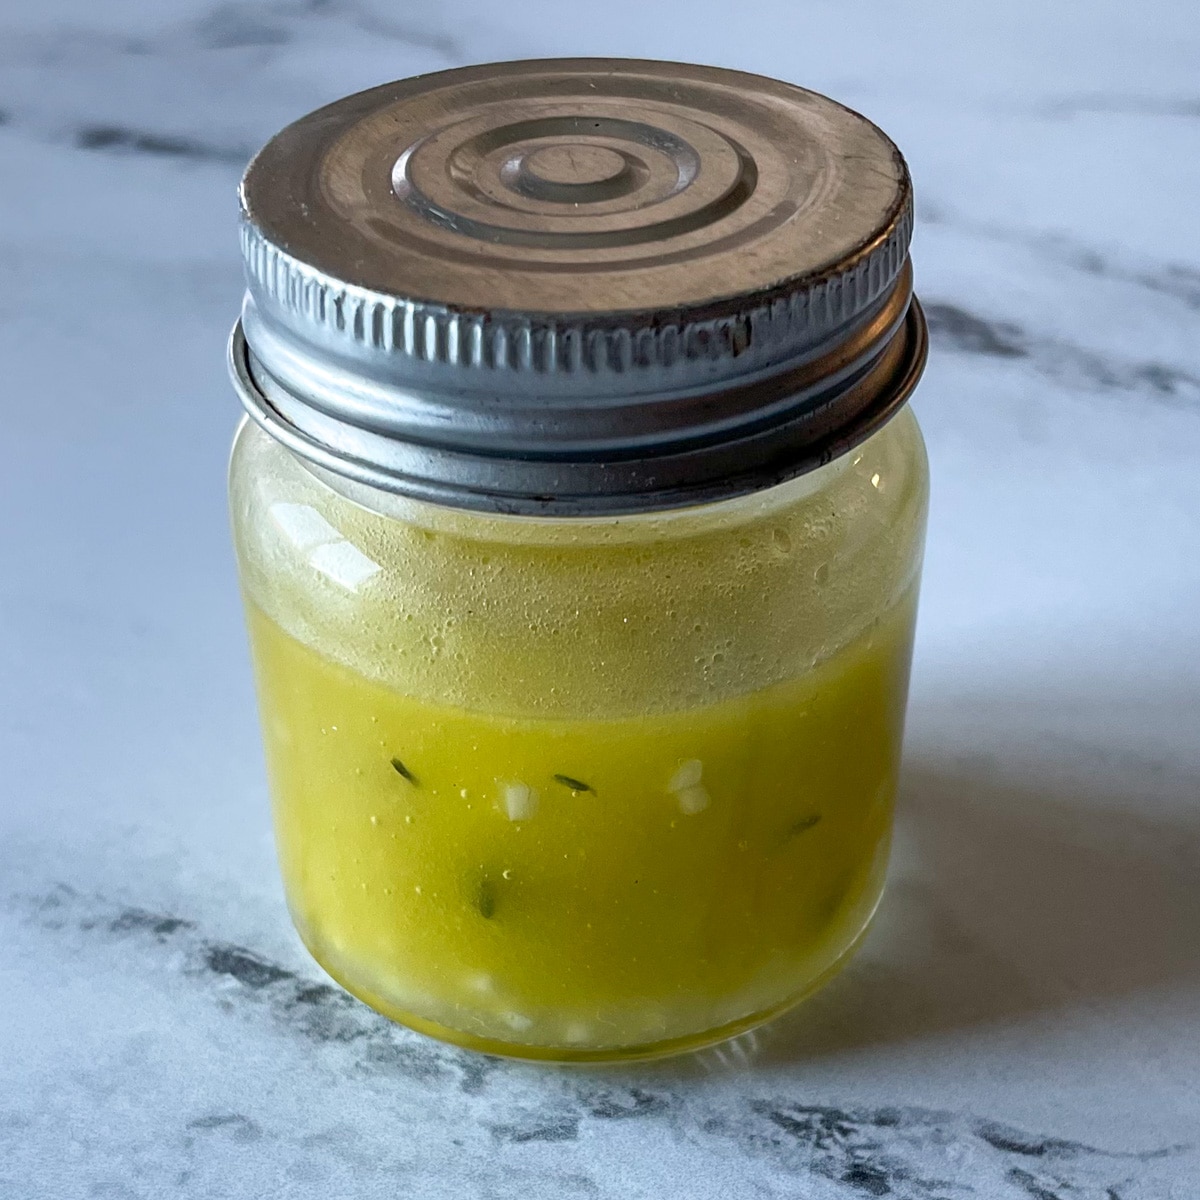 A small clear glass jar with a silver lid containing lemon, garlic, thyme vinaigrette sits on a marble counter top.